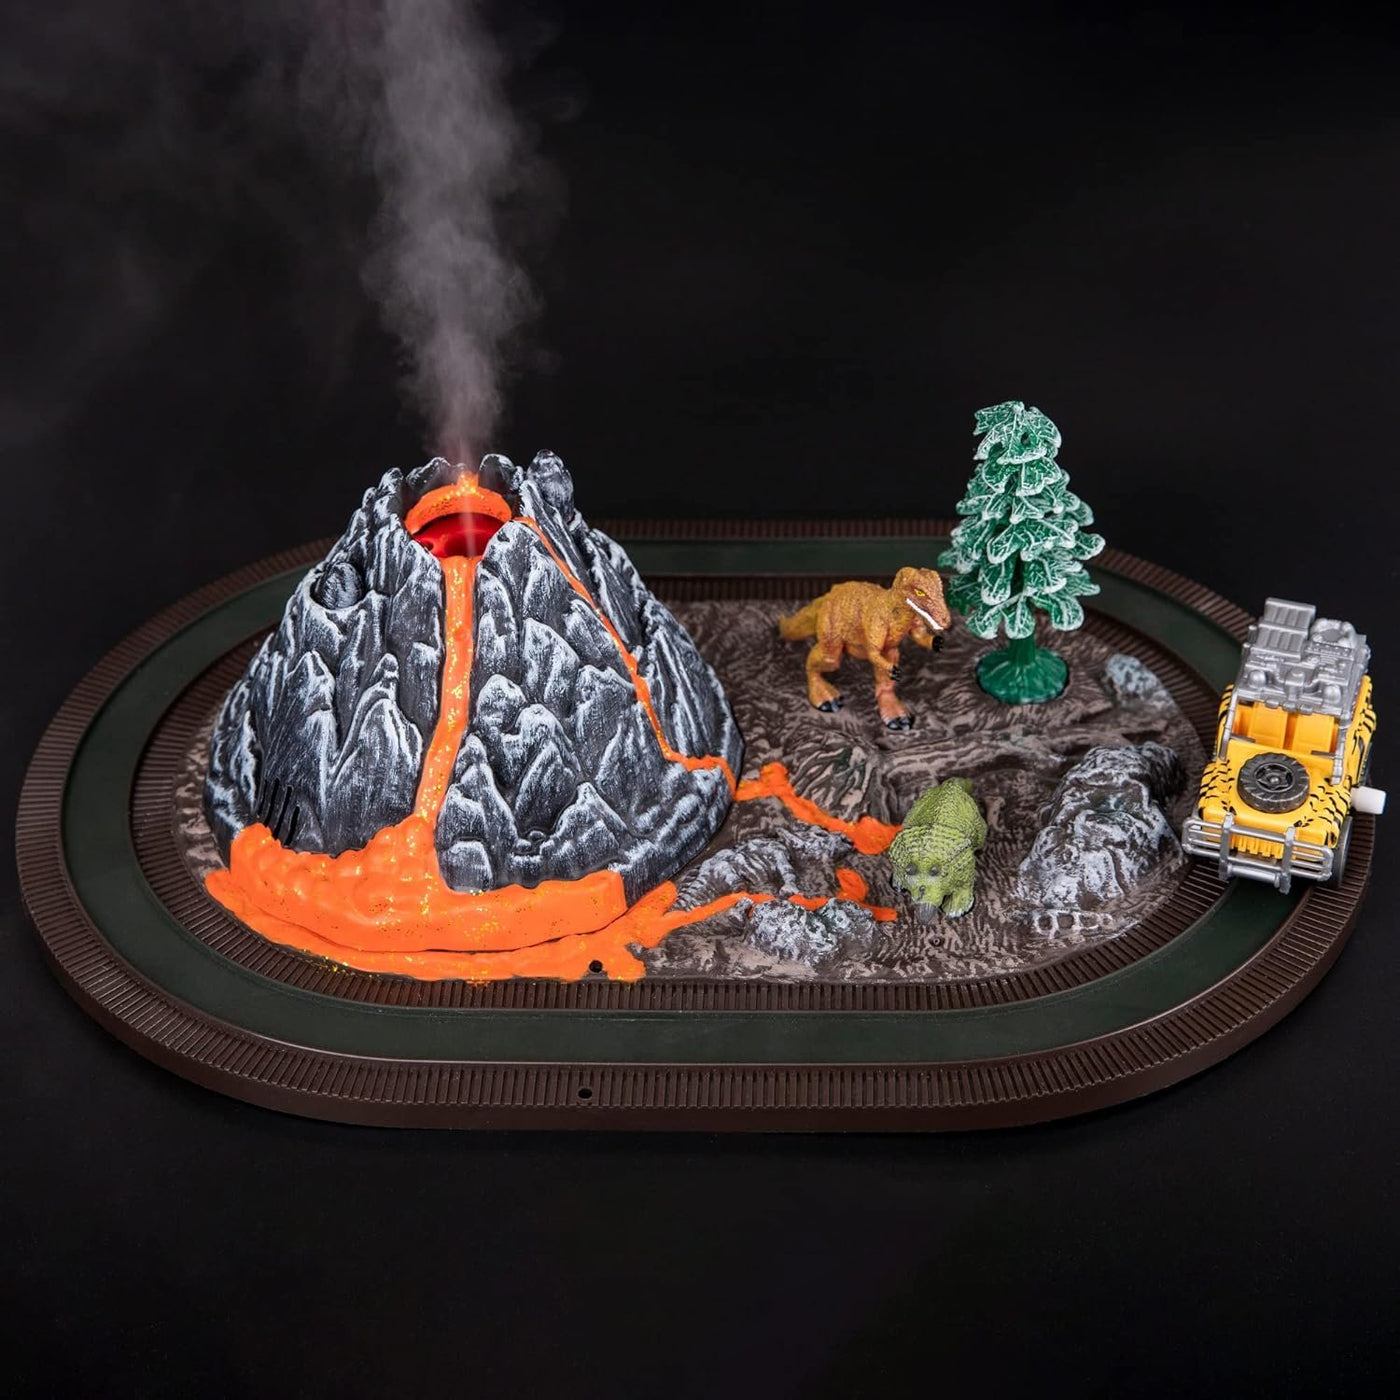 Volcano Dinosaur Playset for Kids, Mist Spouting Volcano Play Set, Dinosaur Toys for Boys, Volcano Science Kit, Volcano Toy Set with Simulated Volcanic Eruptions, Sounds, Wind-up Truck